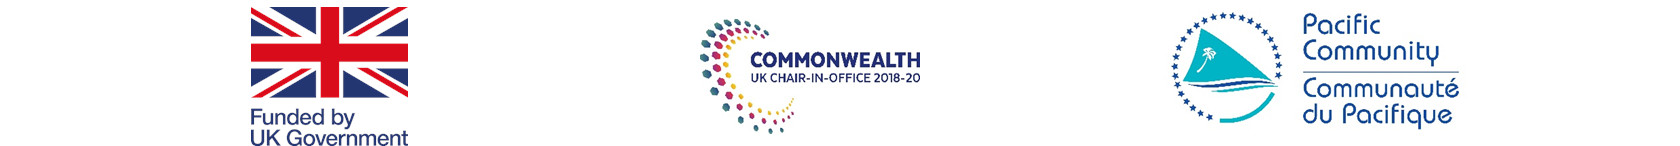 Funded by UK Government - Pacific Commonwealth Project